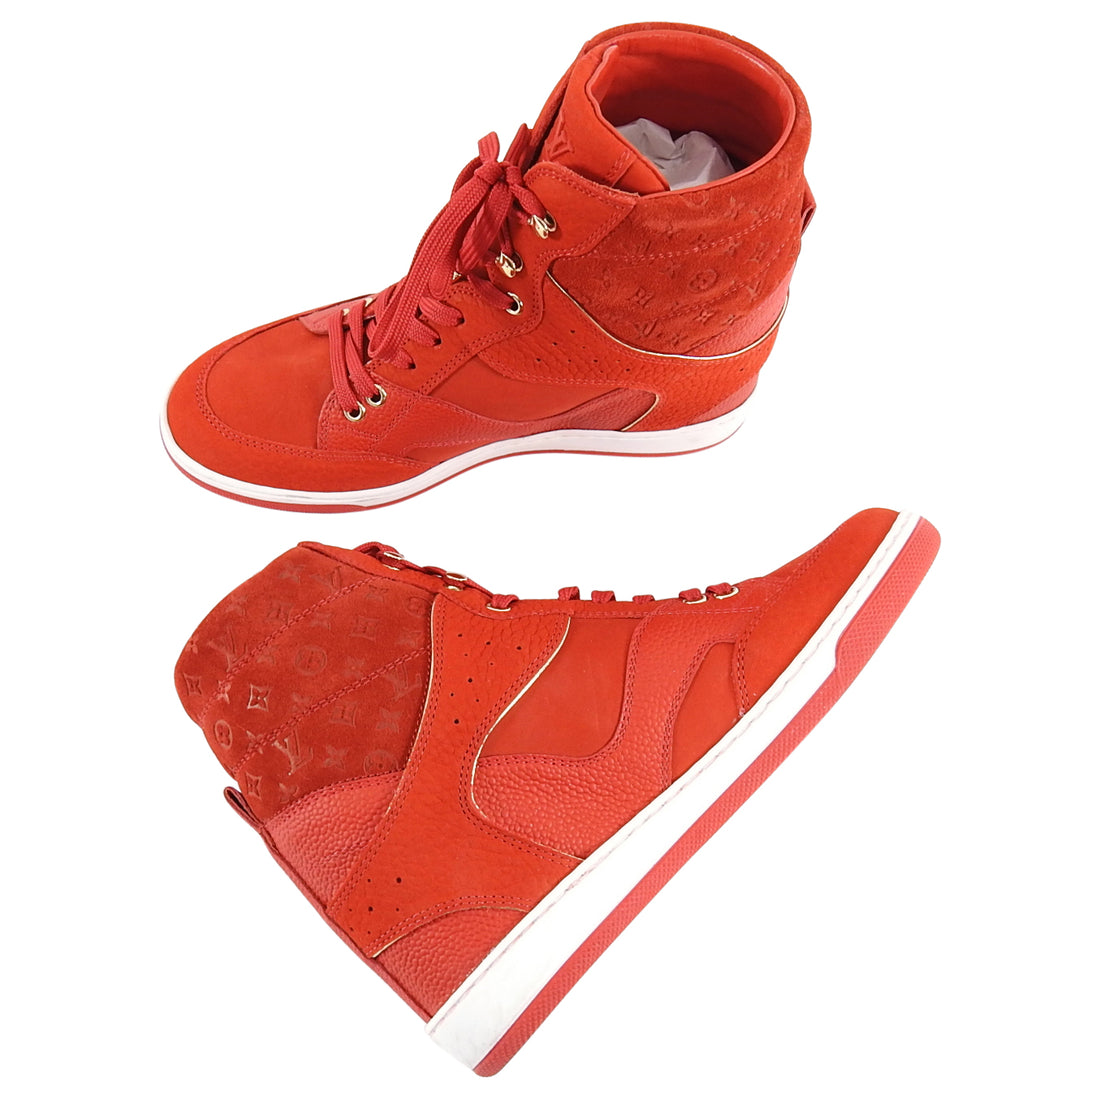 Louis Vuitton Cliff Top Sneaker 460851 Rouge/Red Boots